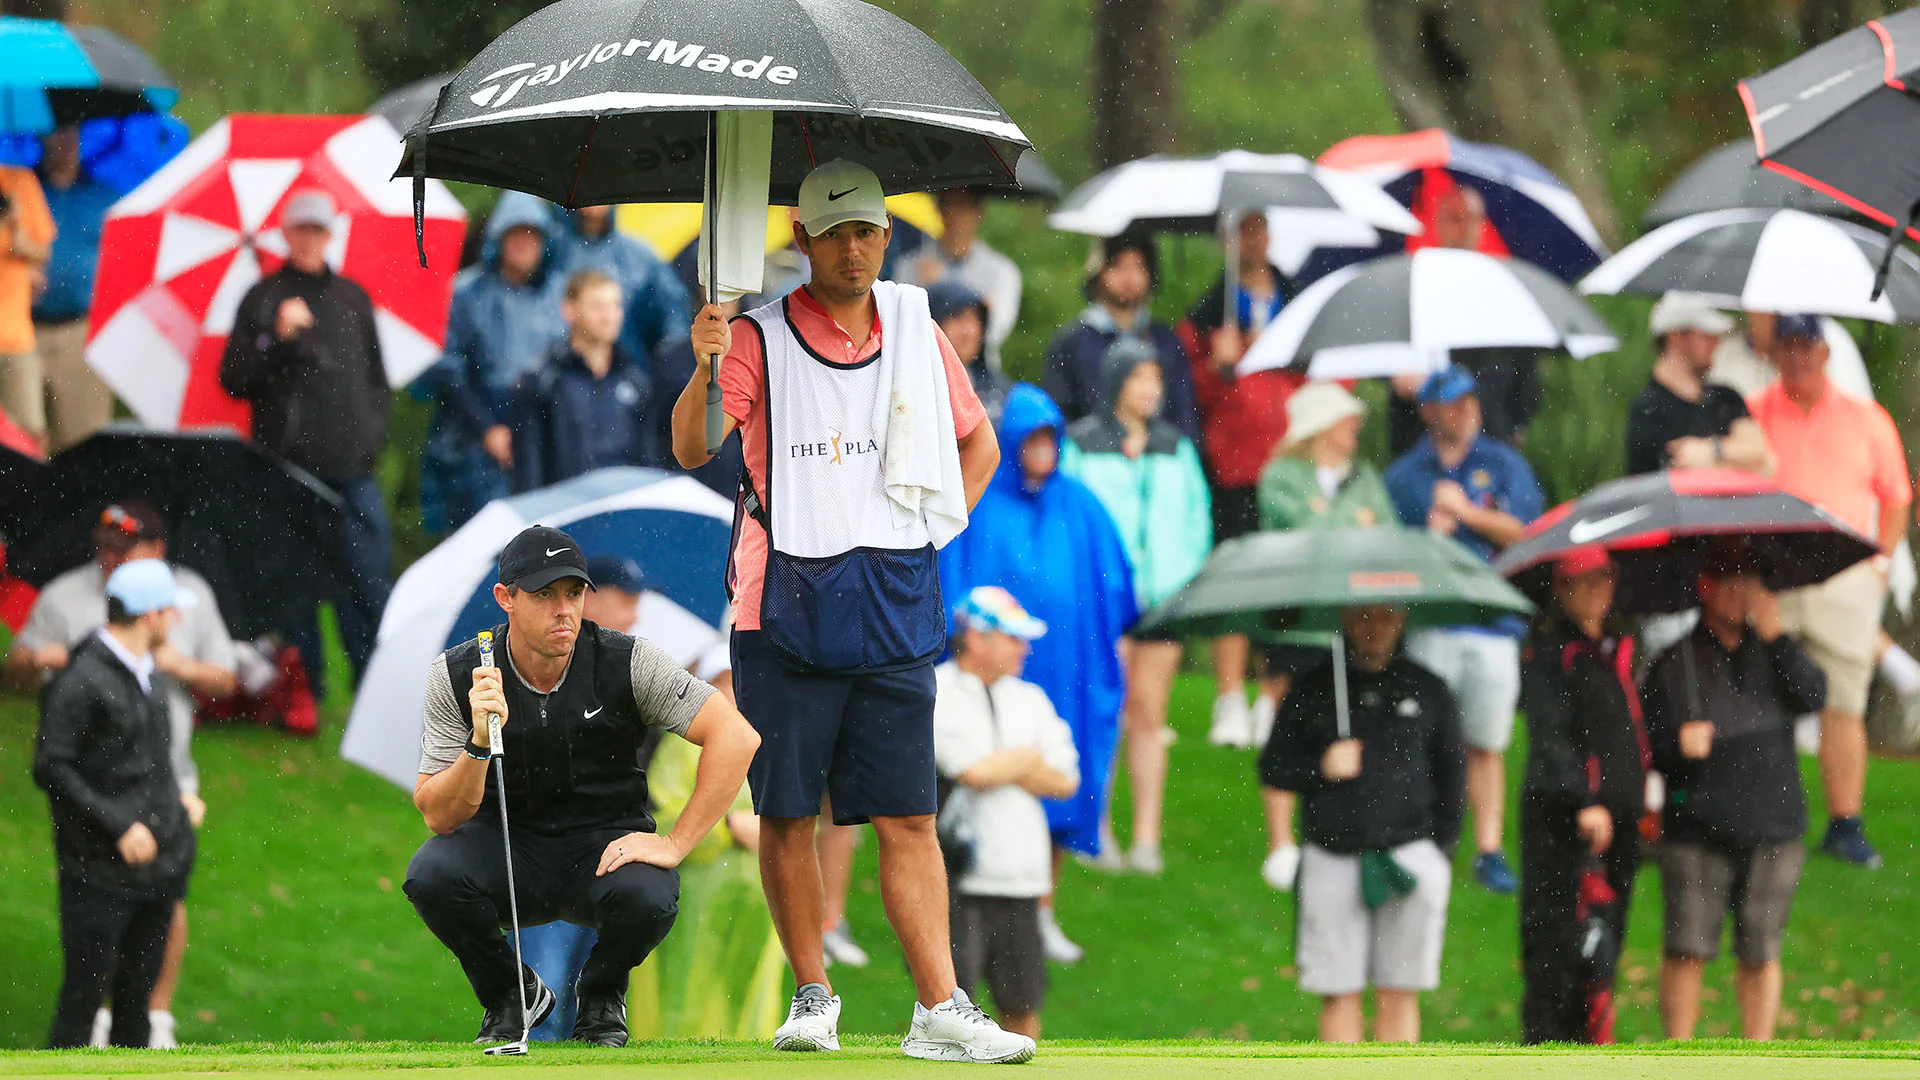 After yet another delay, potential for a Monday finish looms at The Players 2